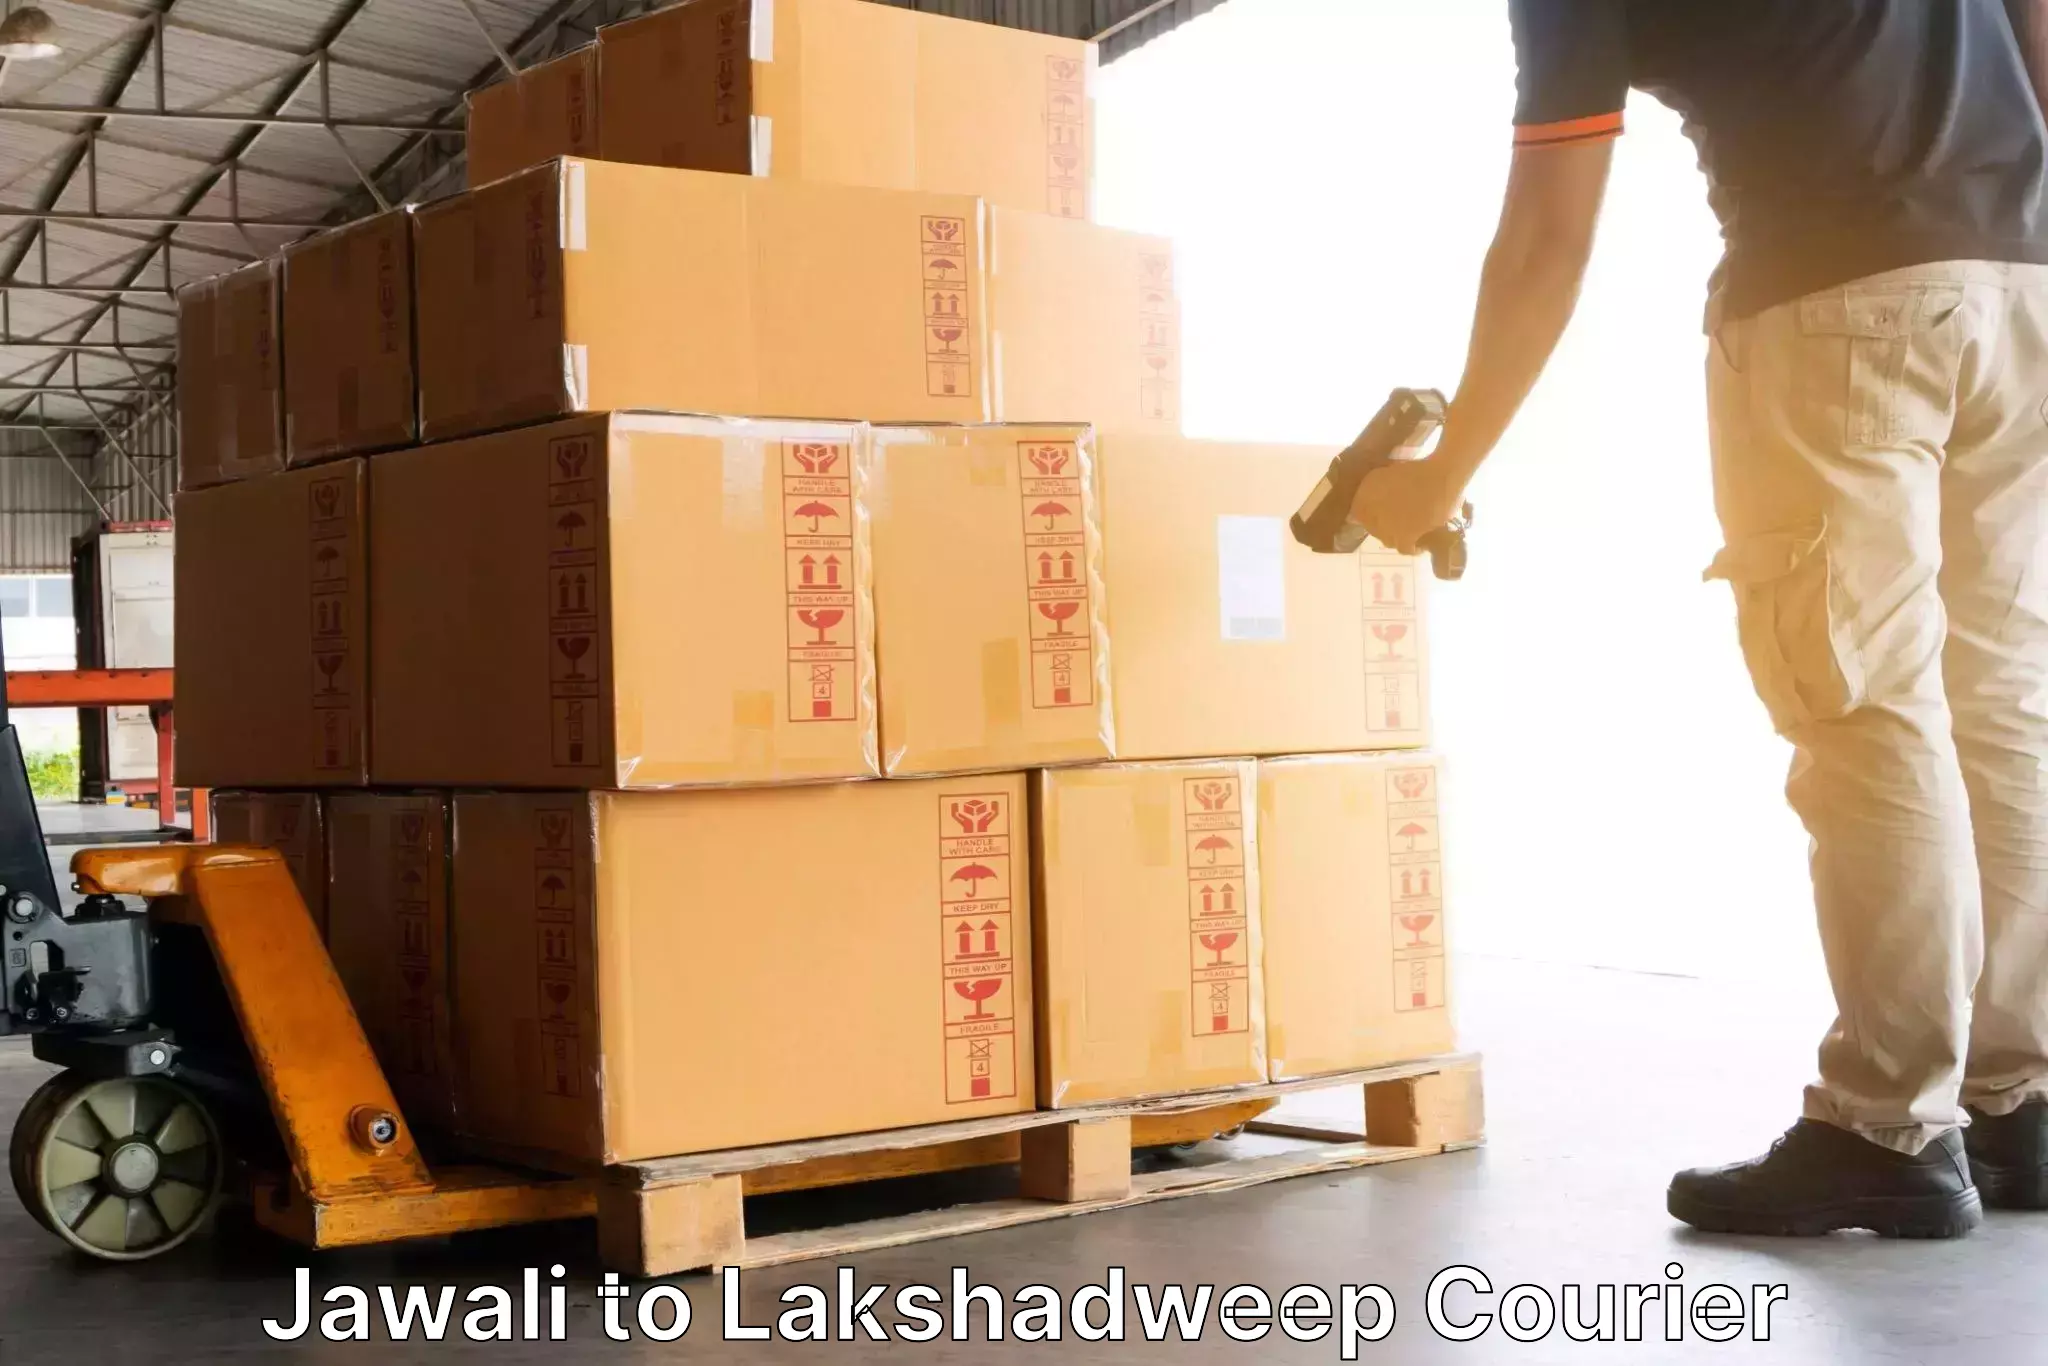 Cargo delivery service Jawali to Lakshadweep